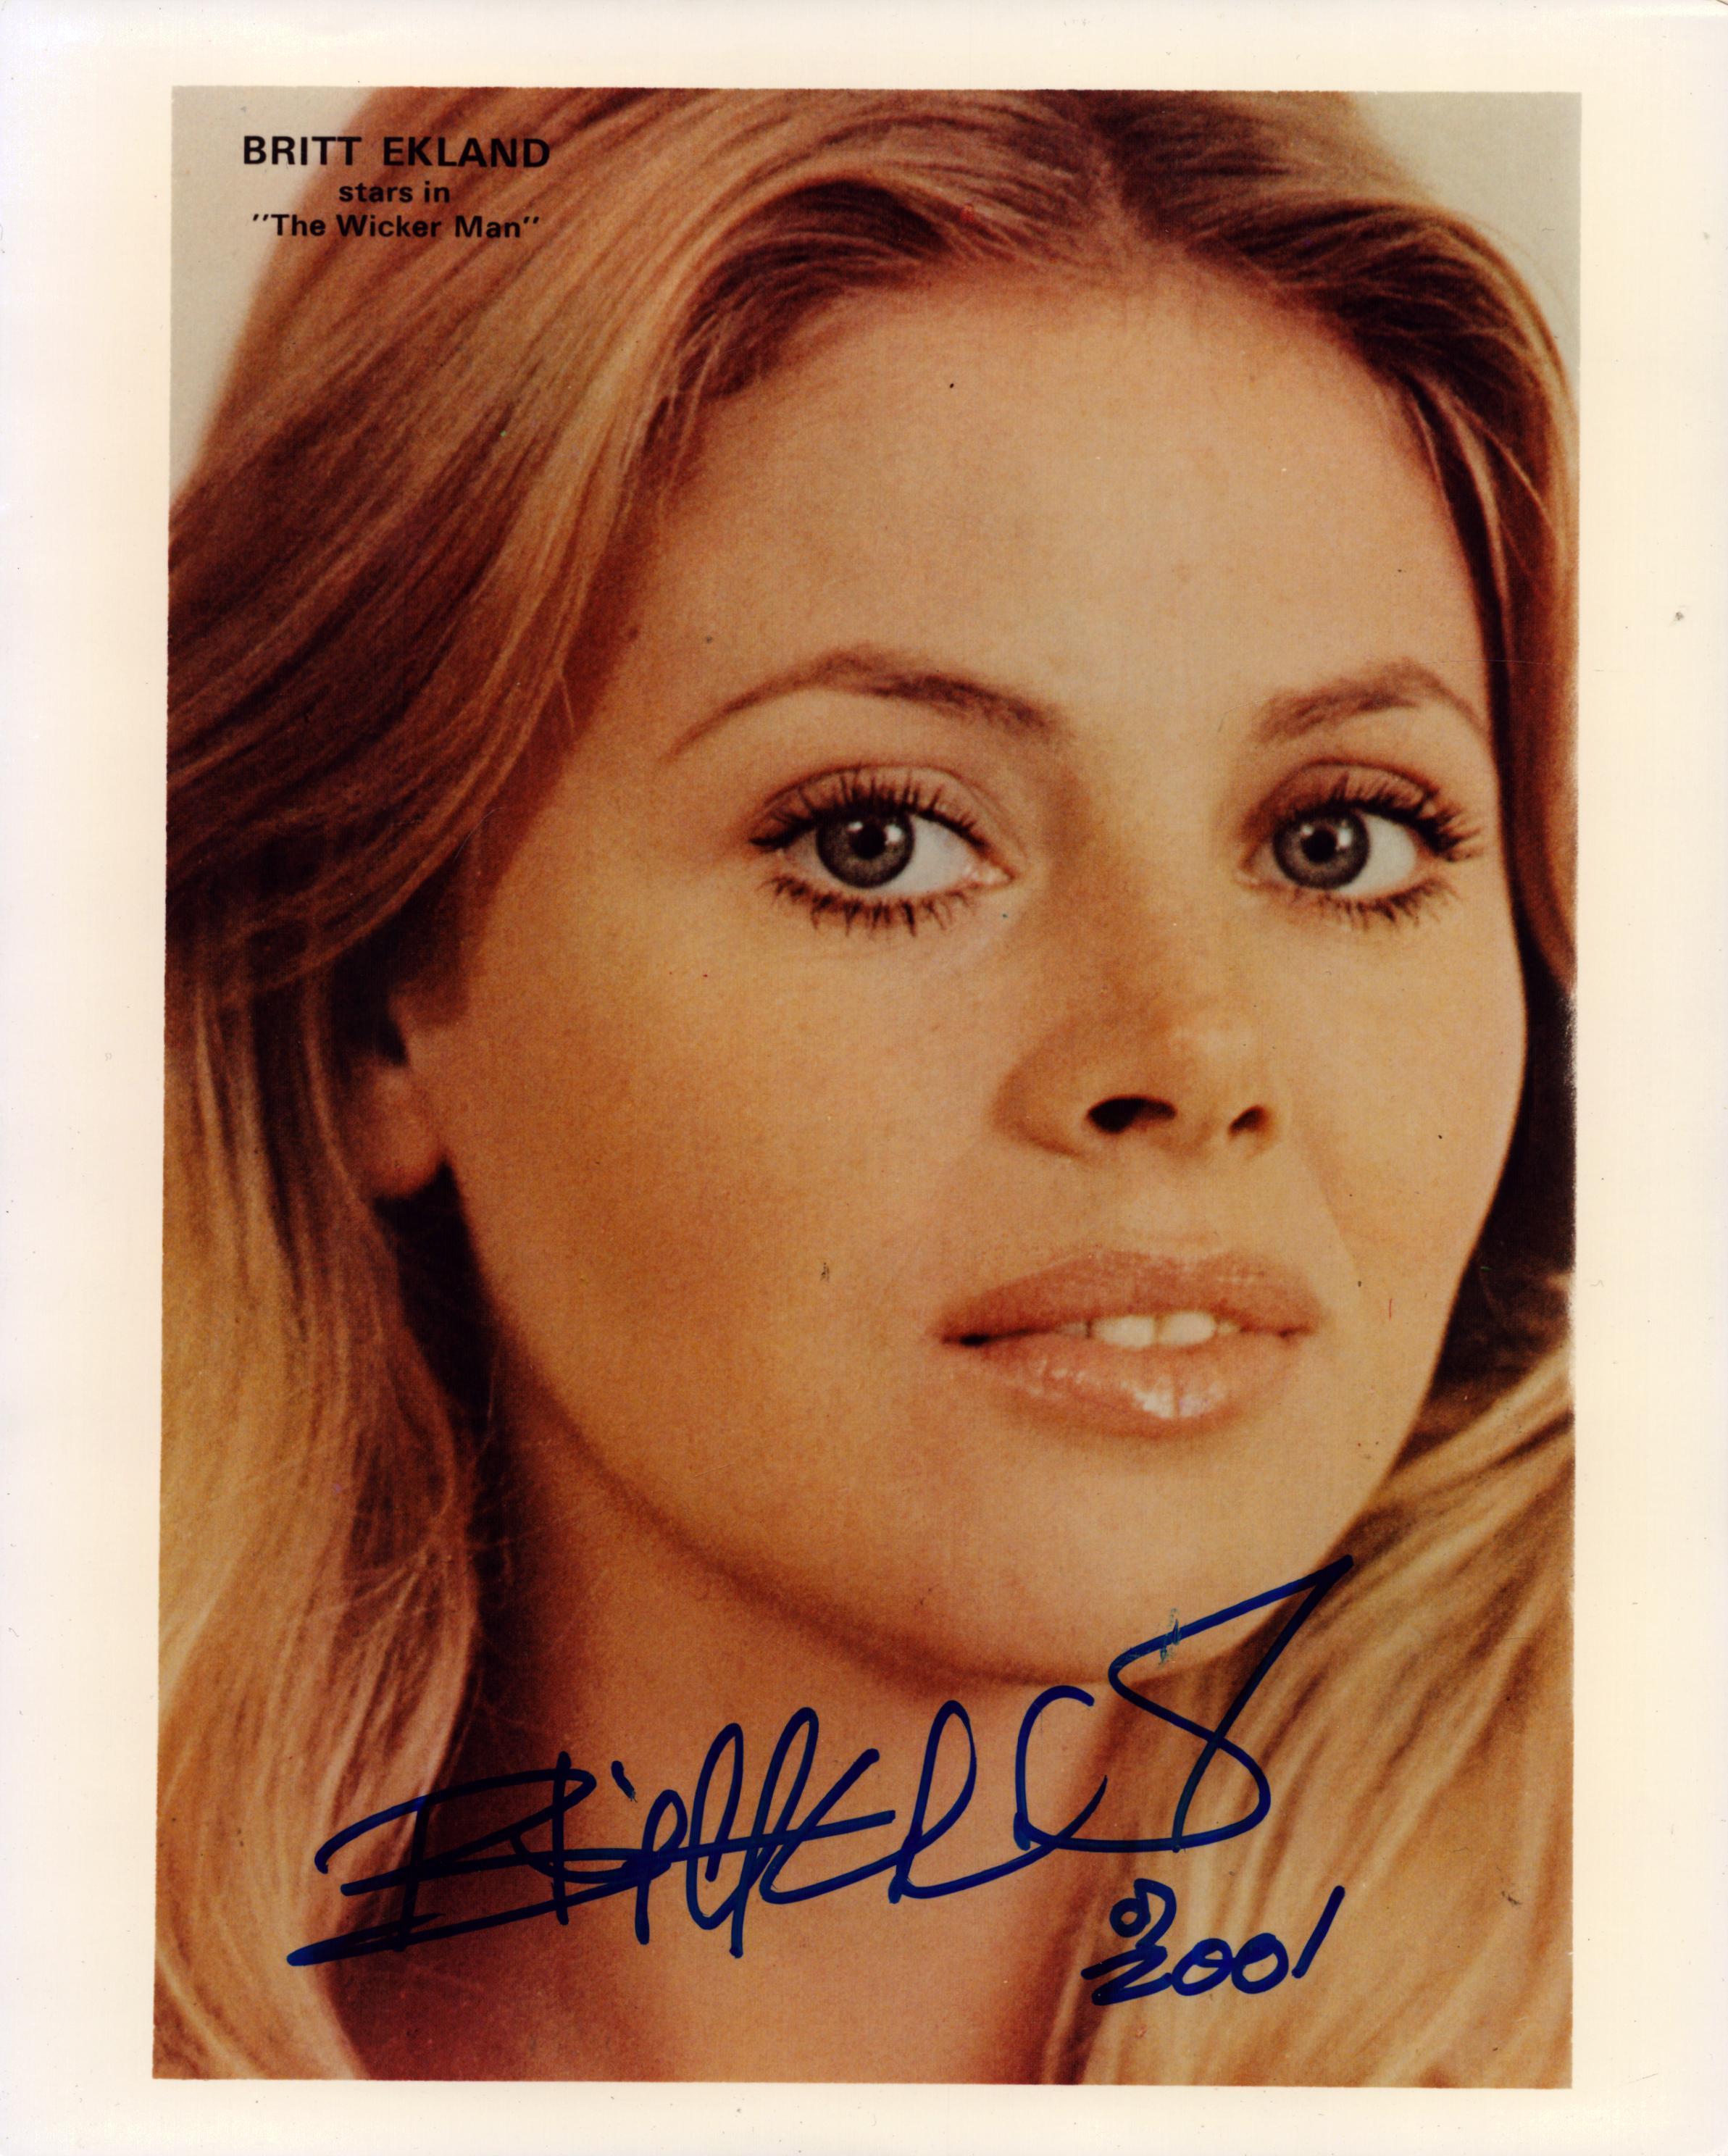 Britt Ekland, Swedish actress signed 10x8 inch colour photo. She appeared in numerous films